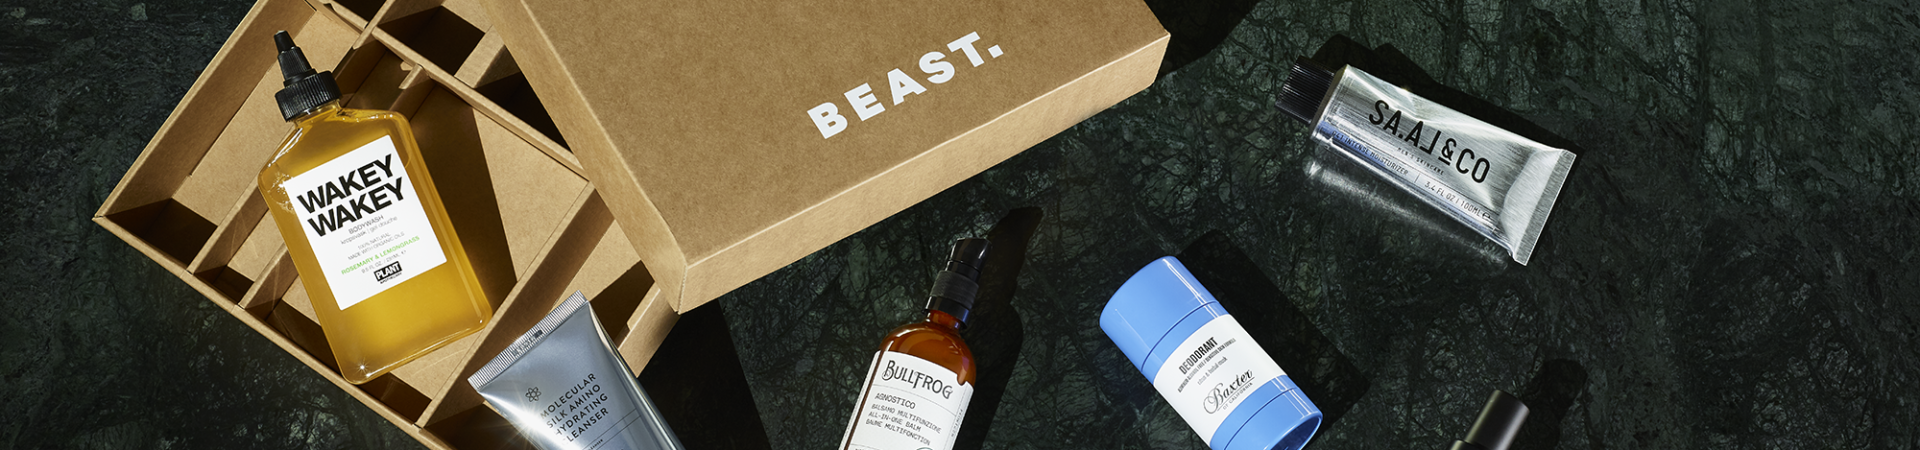 The Esquire x Beast Grooming Box 1920x450 - The Esquire x Beast Grooming Box